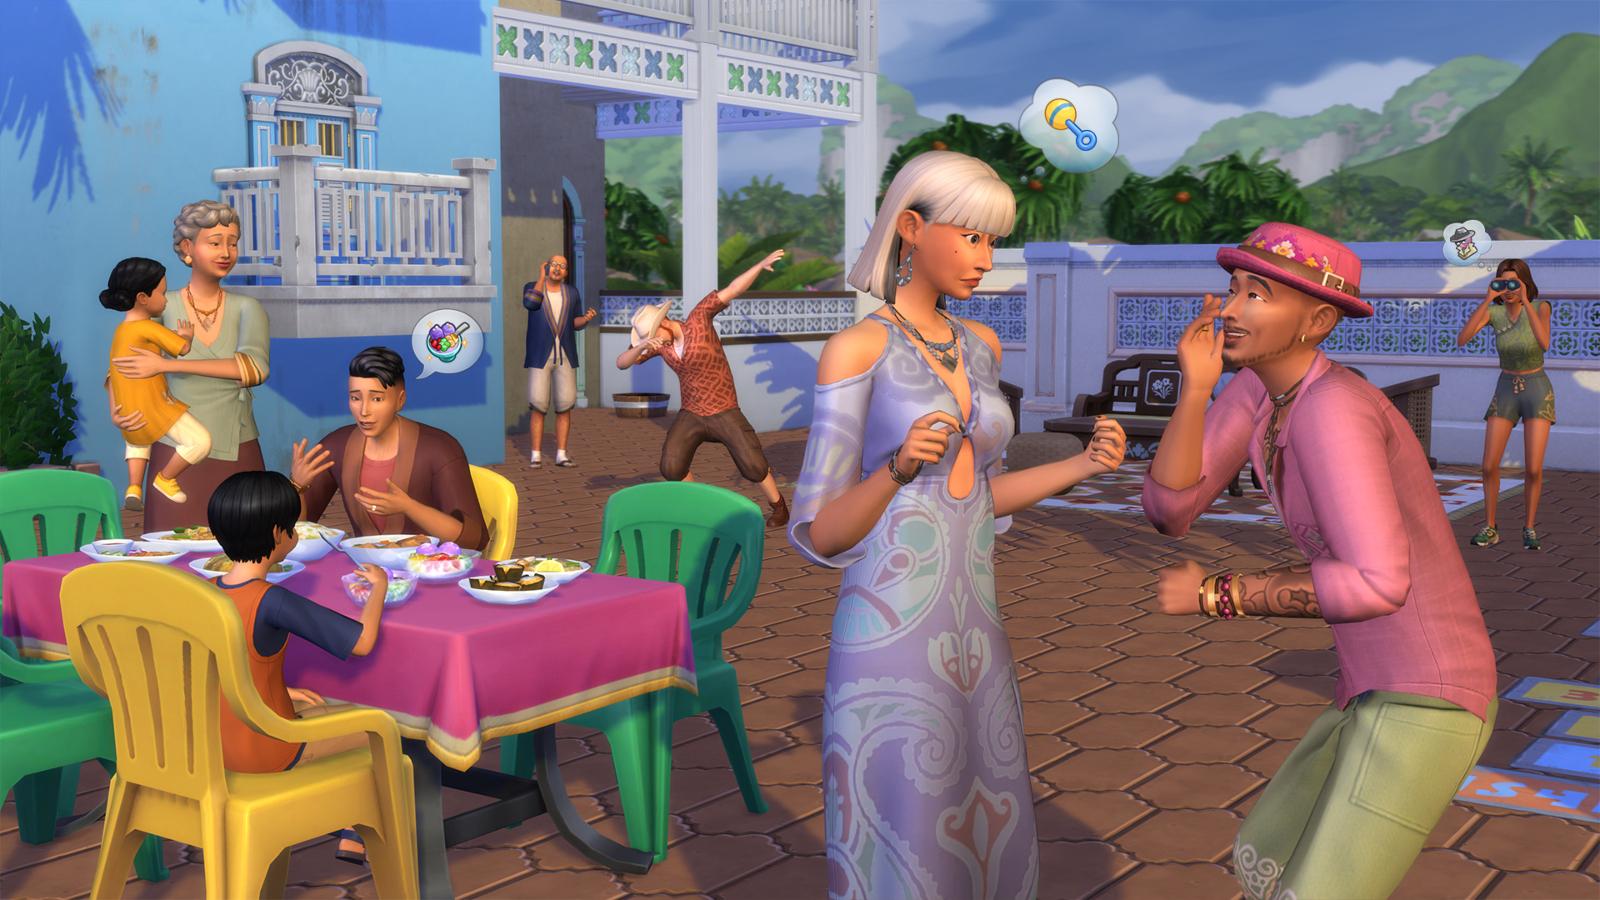 The Sims 4 has landed on Mac, is a free download if you own it on